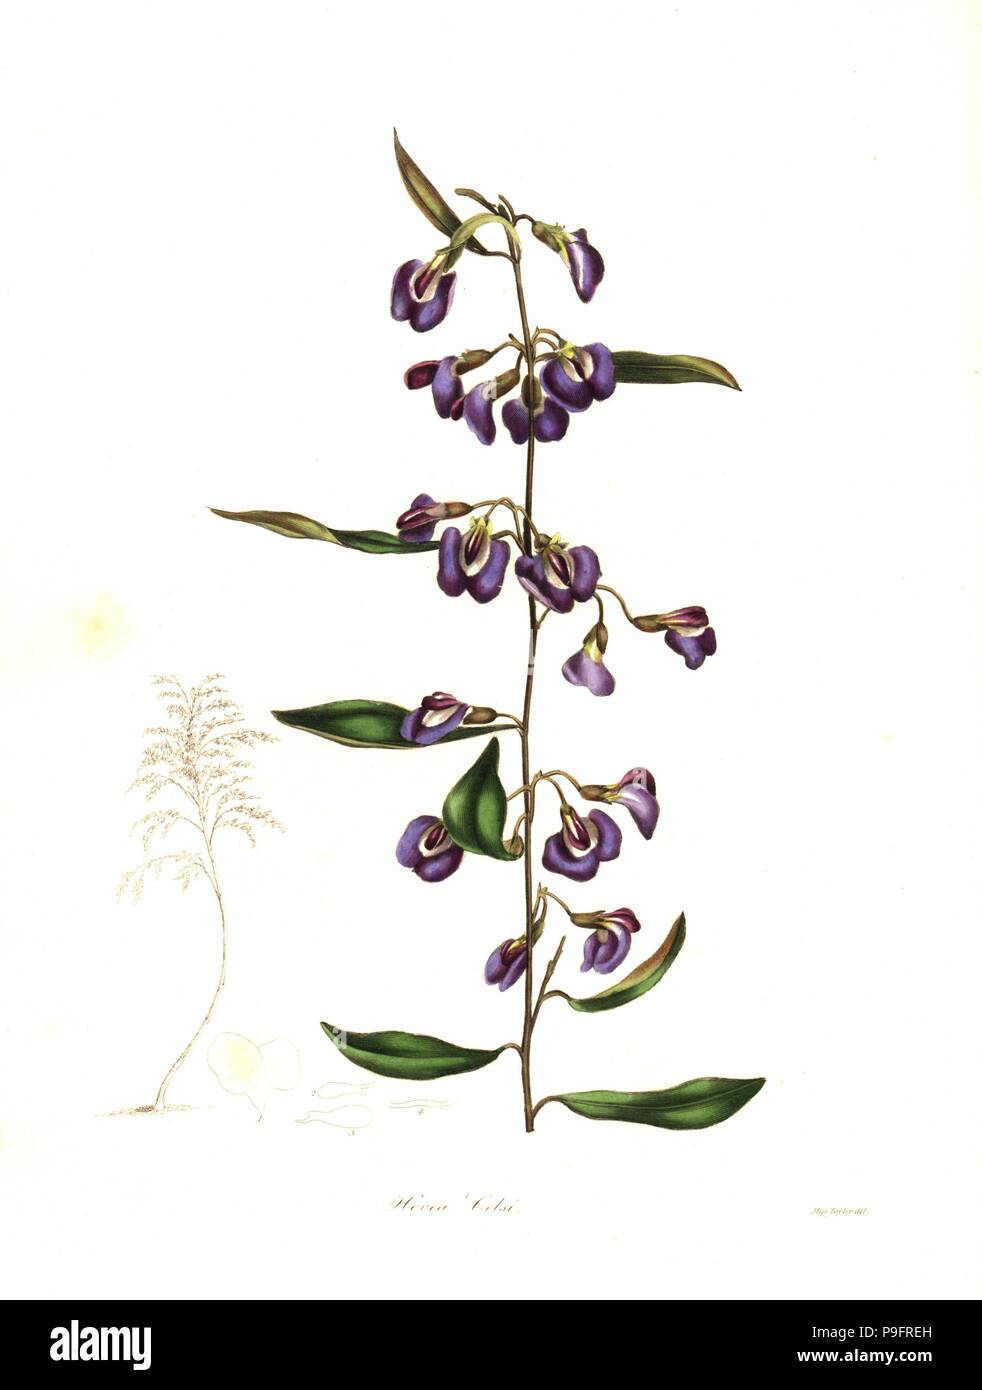 Cels' hovea, Hovea celsi. Handcoloured copperplate engraving after a botanical illustration by Miss Jane Taylor from Benjamin Maund and the Rev. John Stevens Henslow's The Botanist, London, 1836. Stock Photo